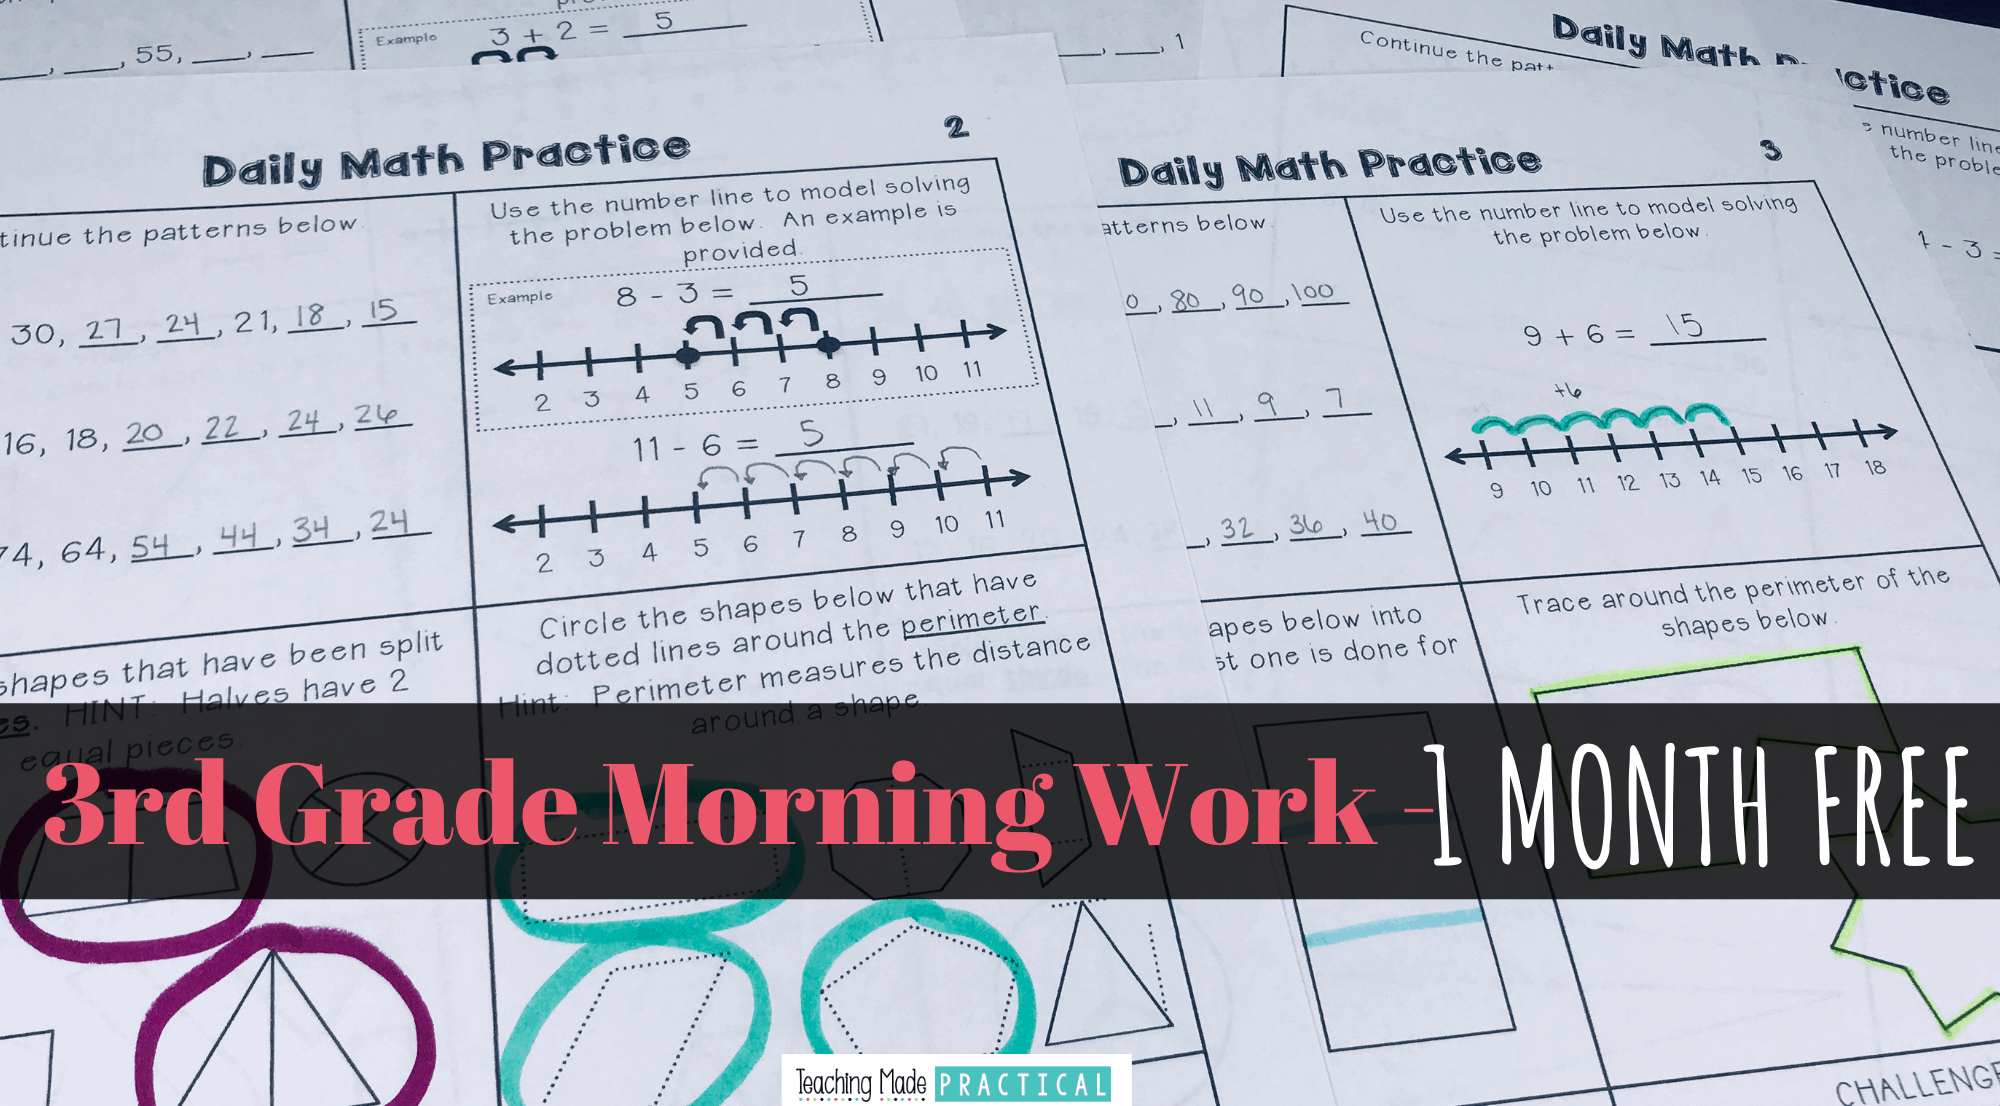 3rd grade teachers - this free resource gives you one week's worth of morning work or daily math practice.  This is best for the beginning of the year, to help review what students learned in 2nd grade.  